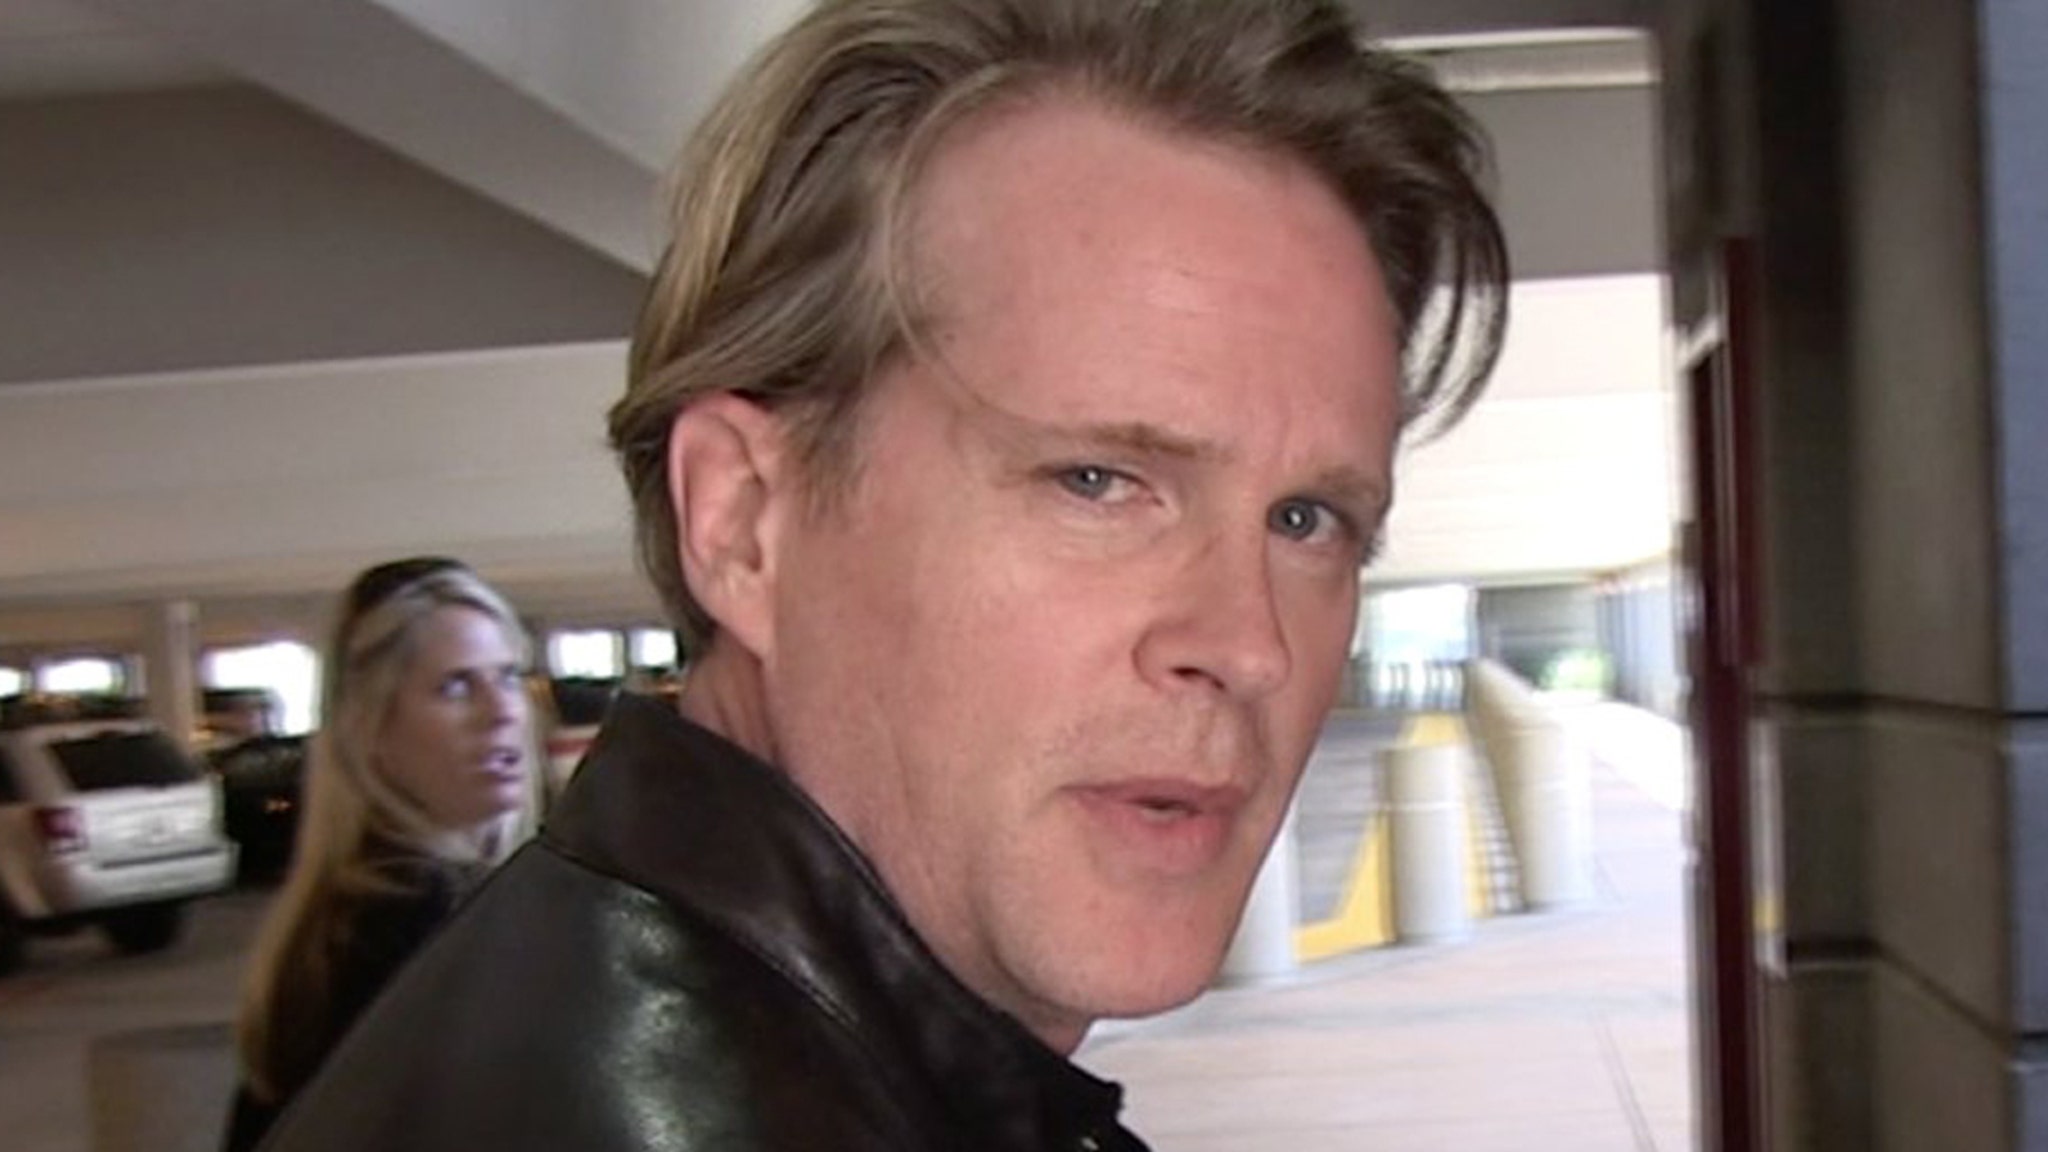 'Princess Bride' Star Cary Elwes Airlifted to Hospital After Rattlesnake Bite